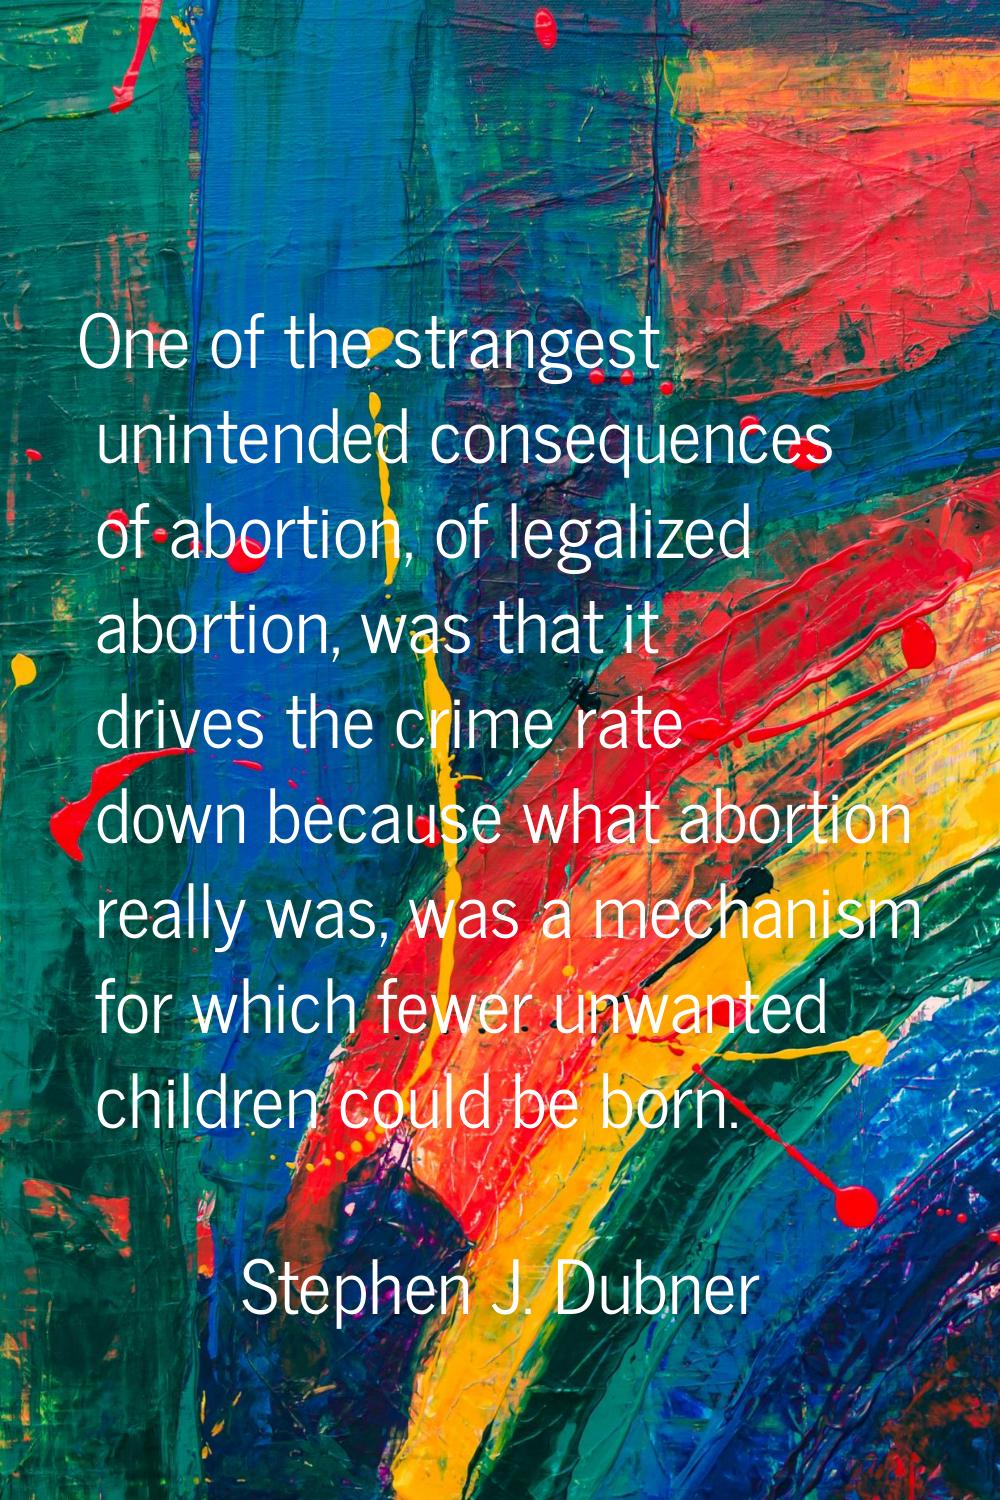 One of the strangest unintended consequences of abortion, of legalized abortion, was that it drives